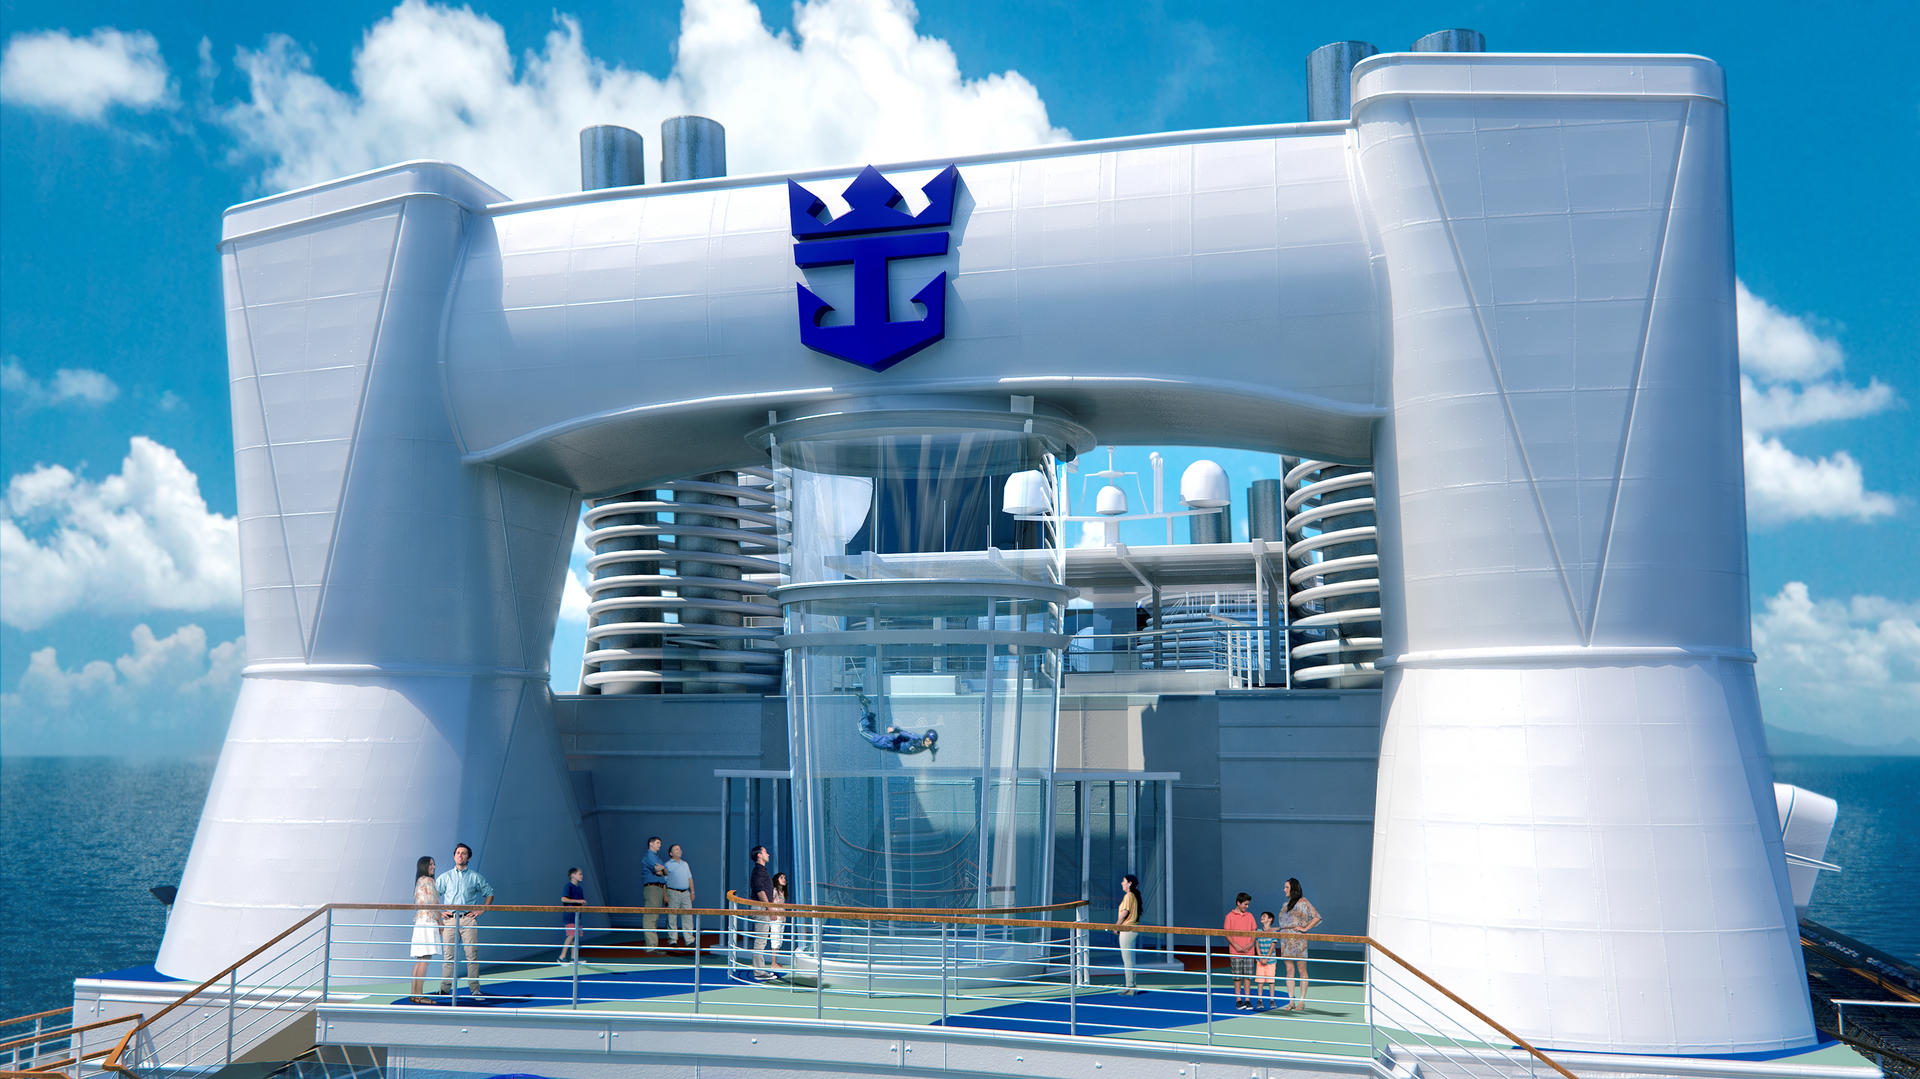 Artist's impression of a sky diving simulator on a Royal Caribbean cruise ship.